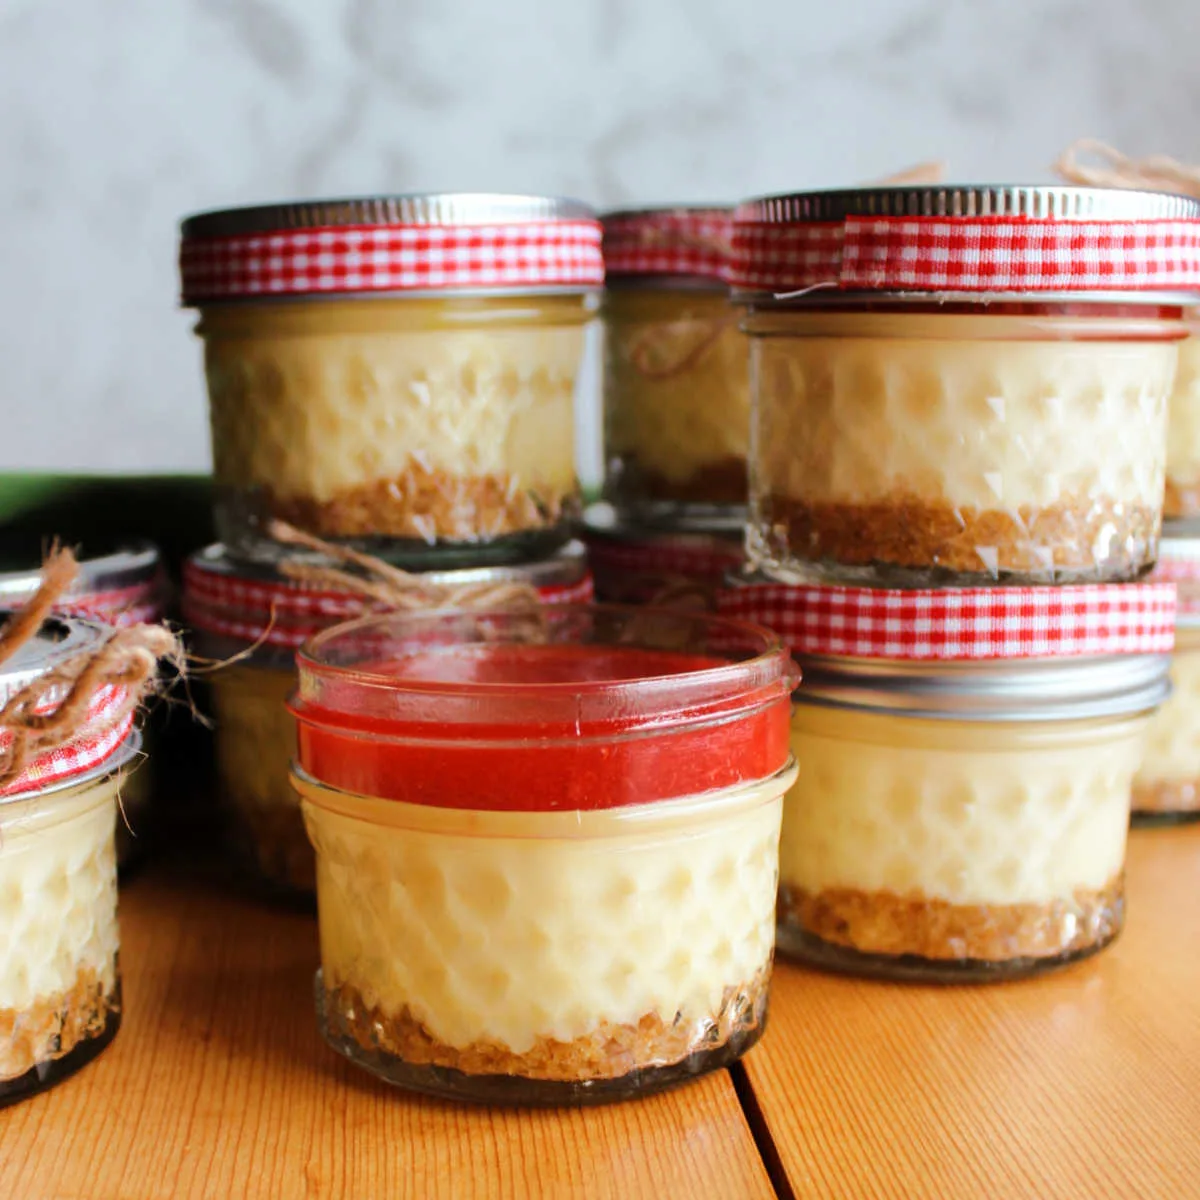 jars of cheesecake with graham cracker crust and strawberry topping.